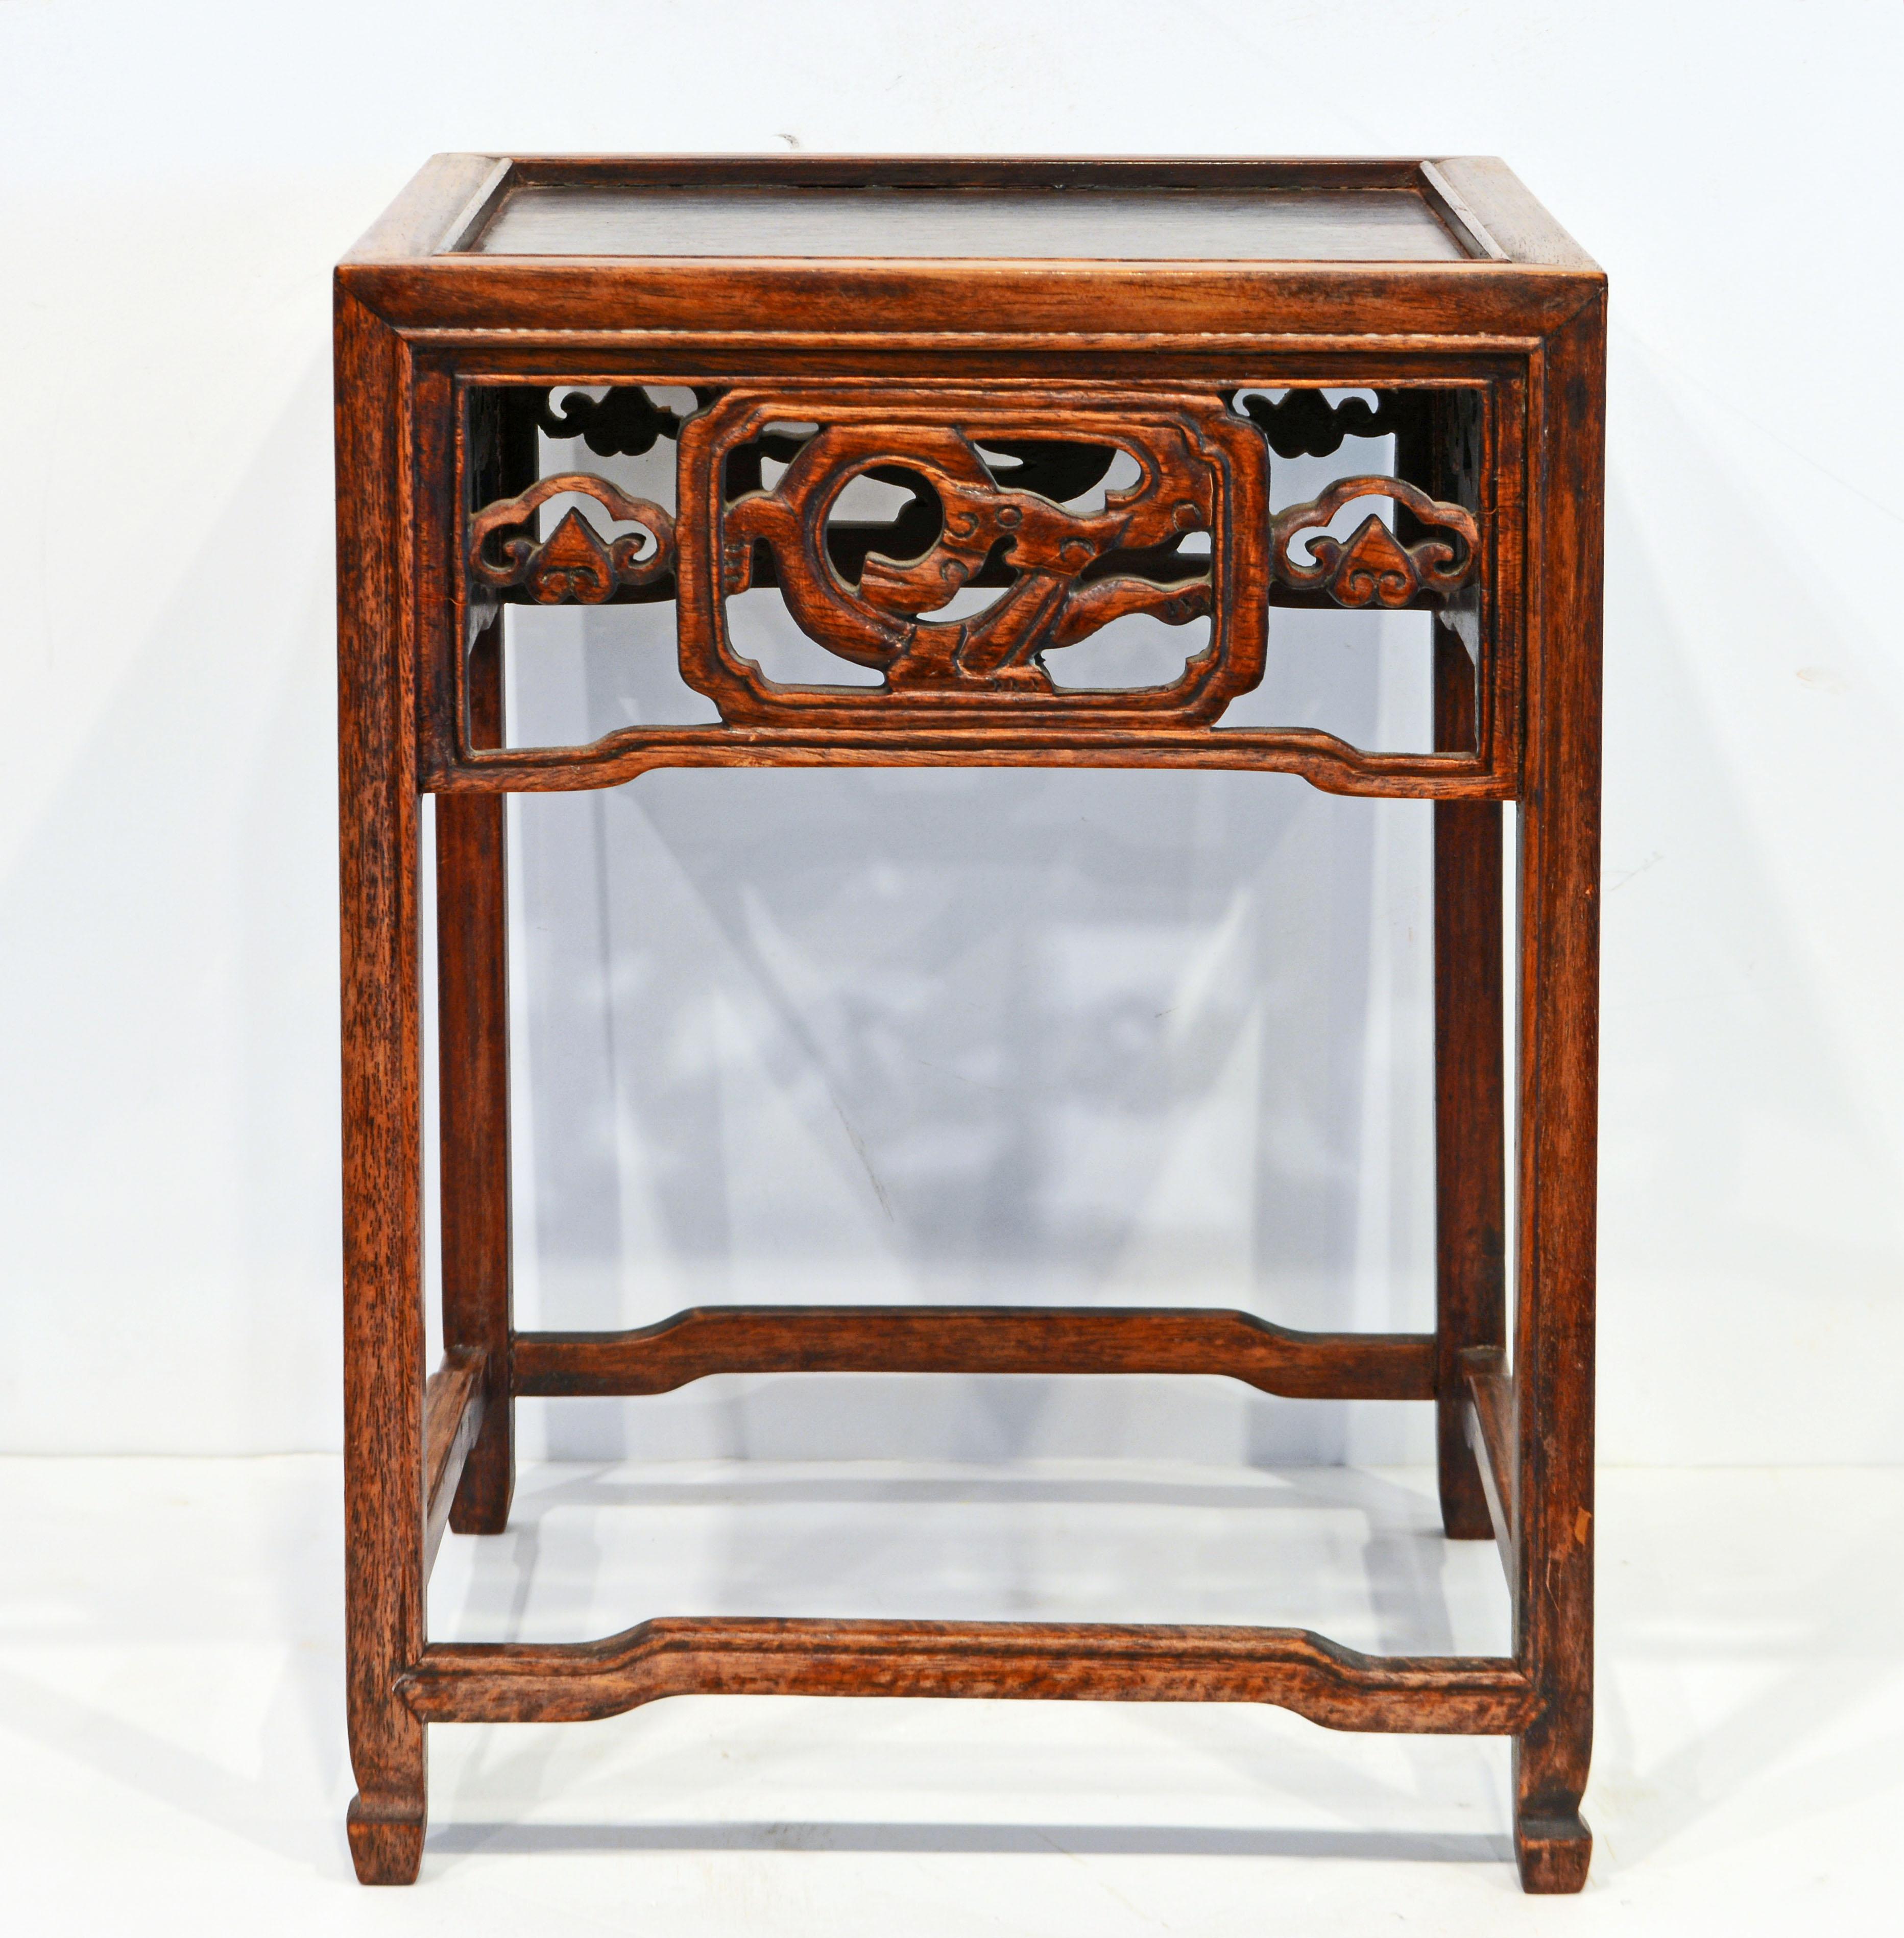 Hand-Carved Antique Ming Style Chinese Delicately Carved Huanghuali Table or Display Stand